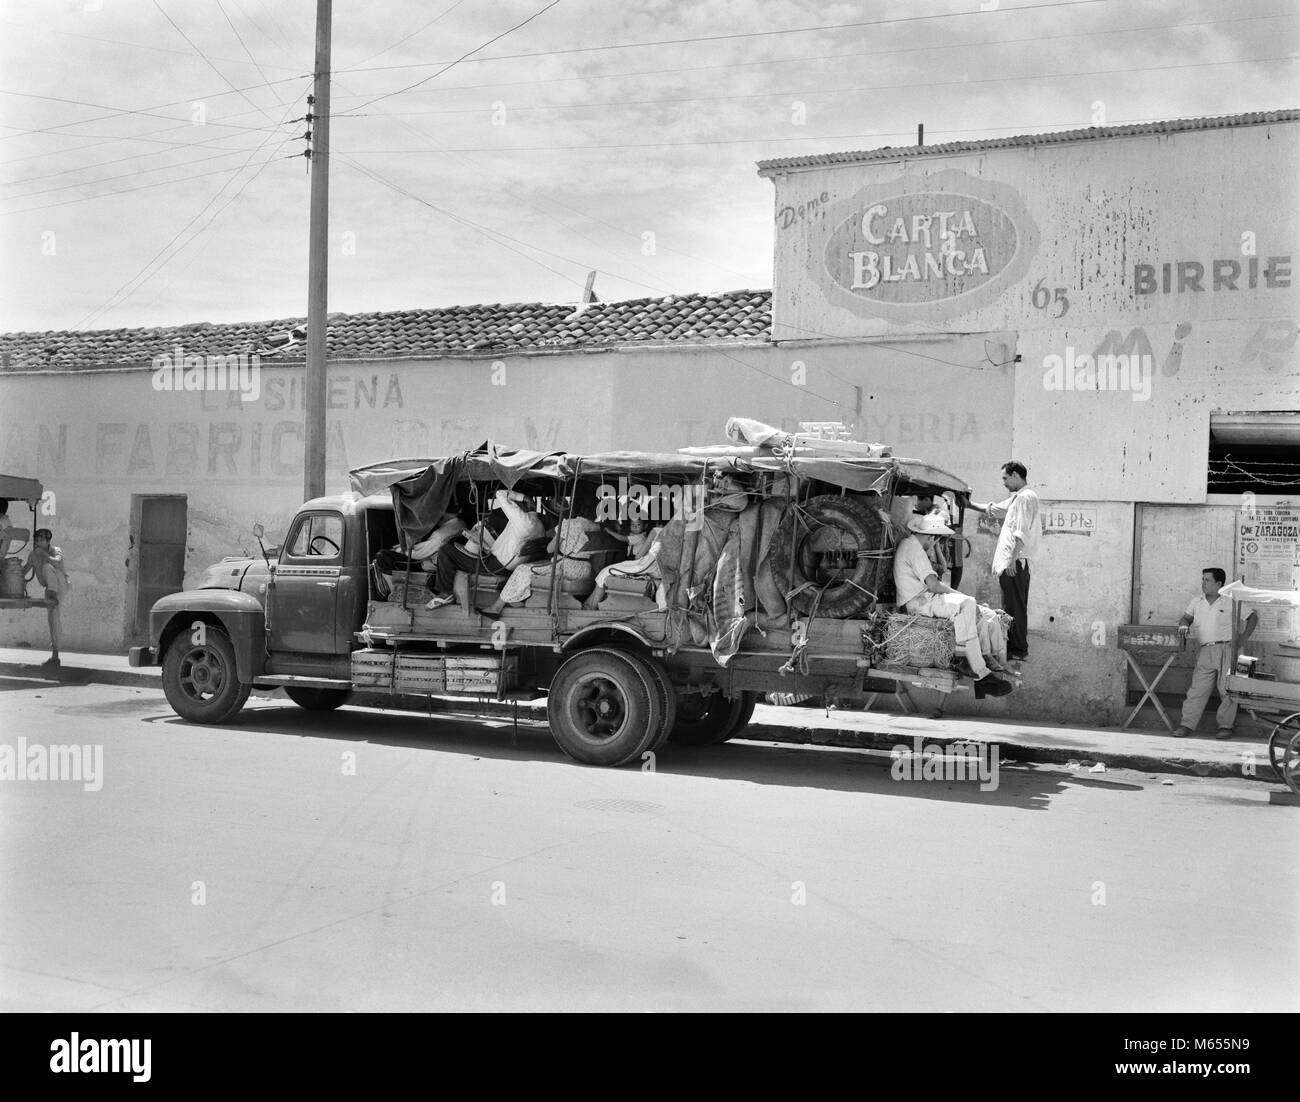 1930s PEOPLE RIDING ON TRUCK BUS WITH OPEN SIDES LUGGAGE PILED IN BACK RURAL MEXICO - asp lt163a ASP001 HARS WRECK Stock Photo